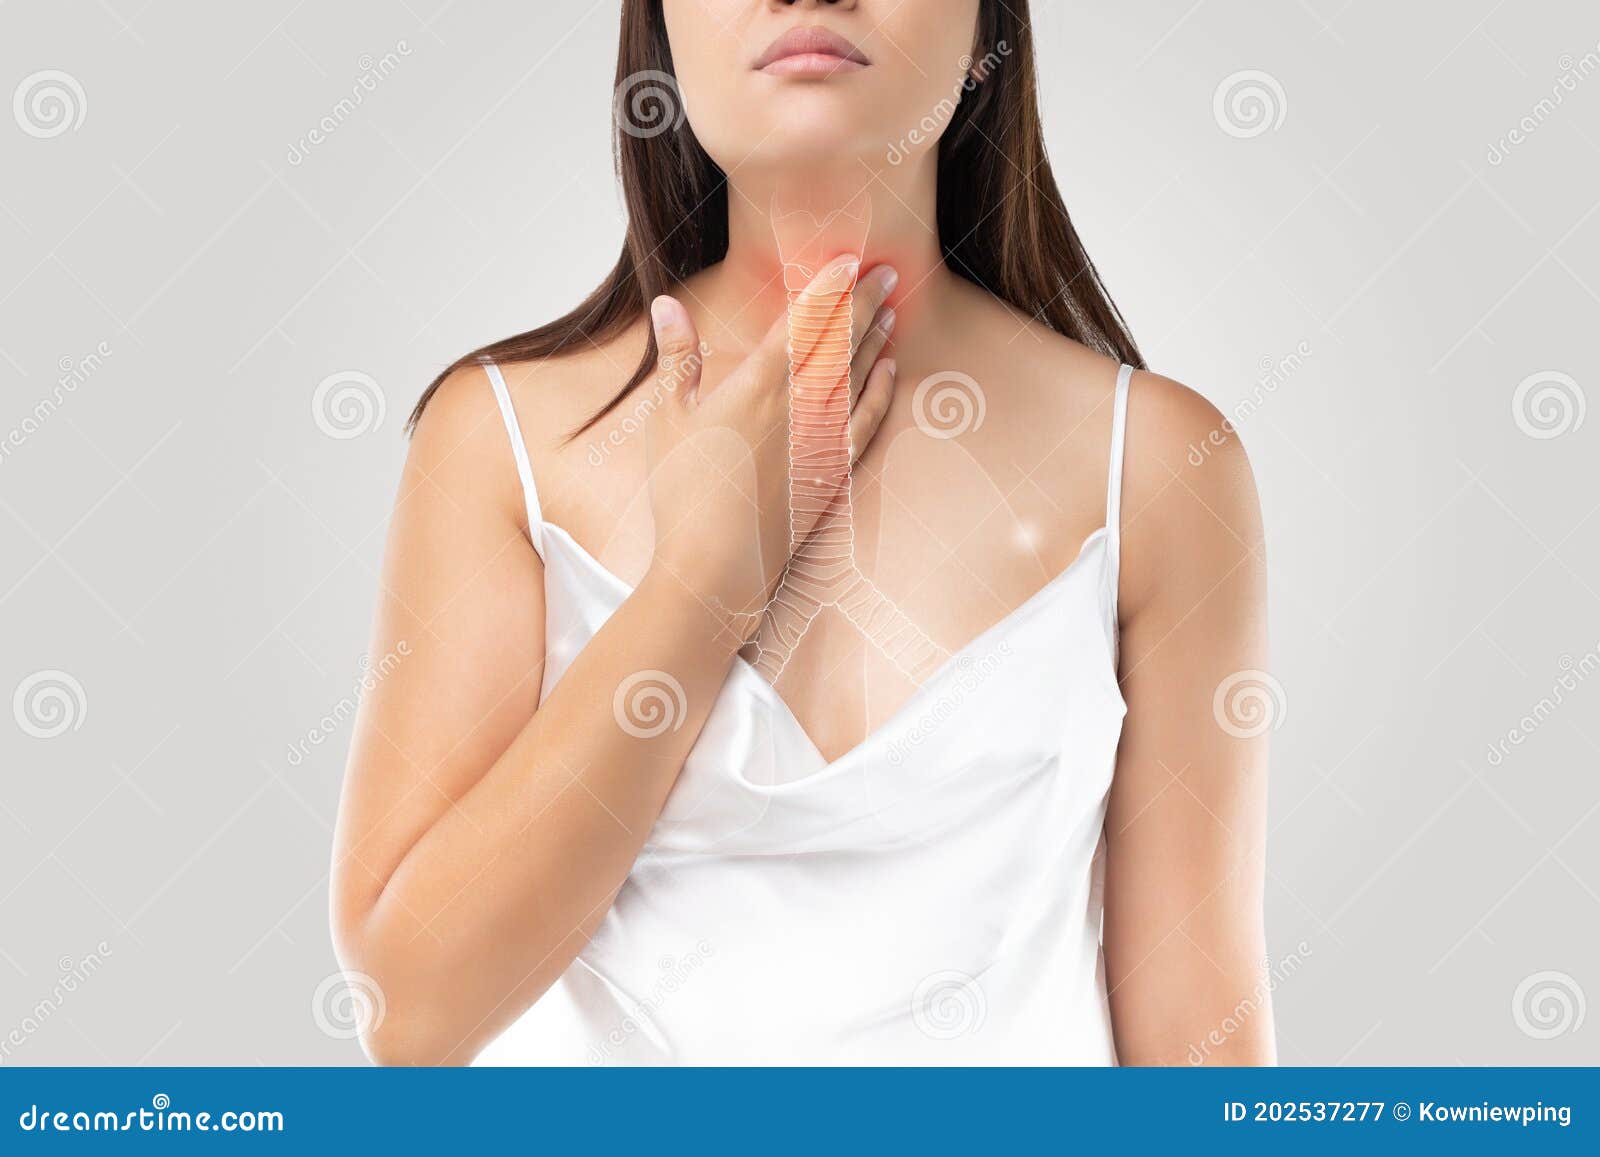 bronchial or windpipe on the woman body and bronchitis symptoms